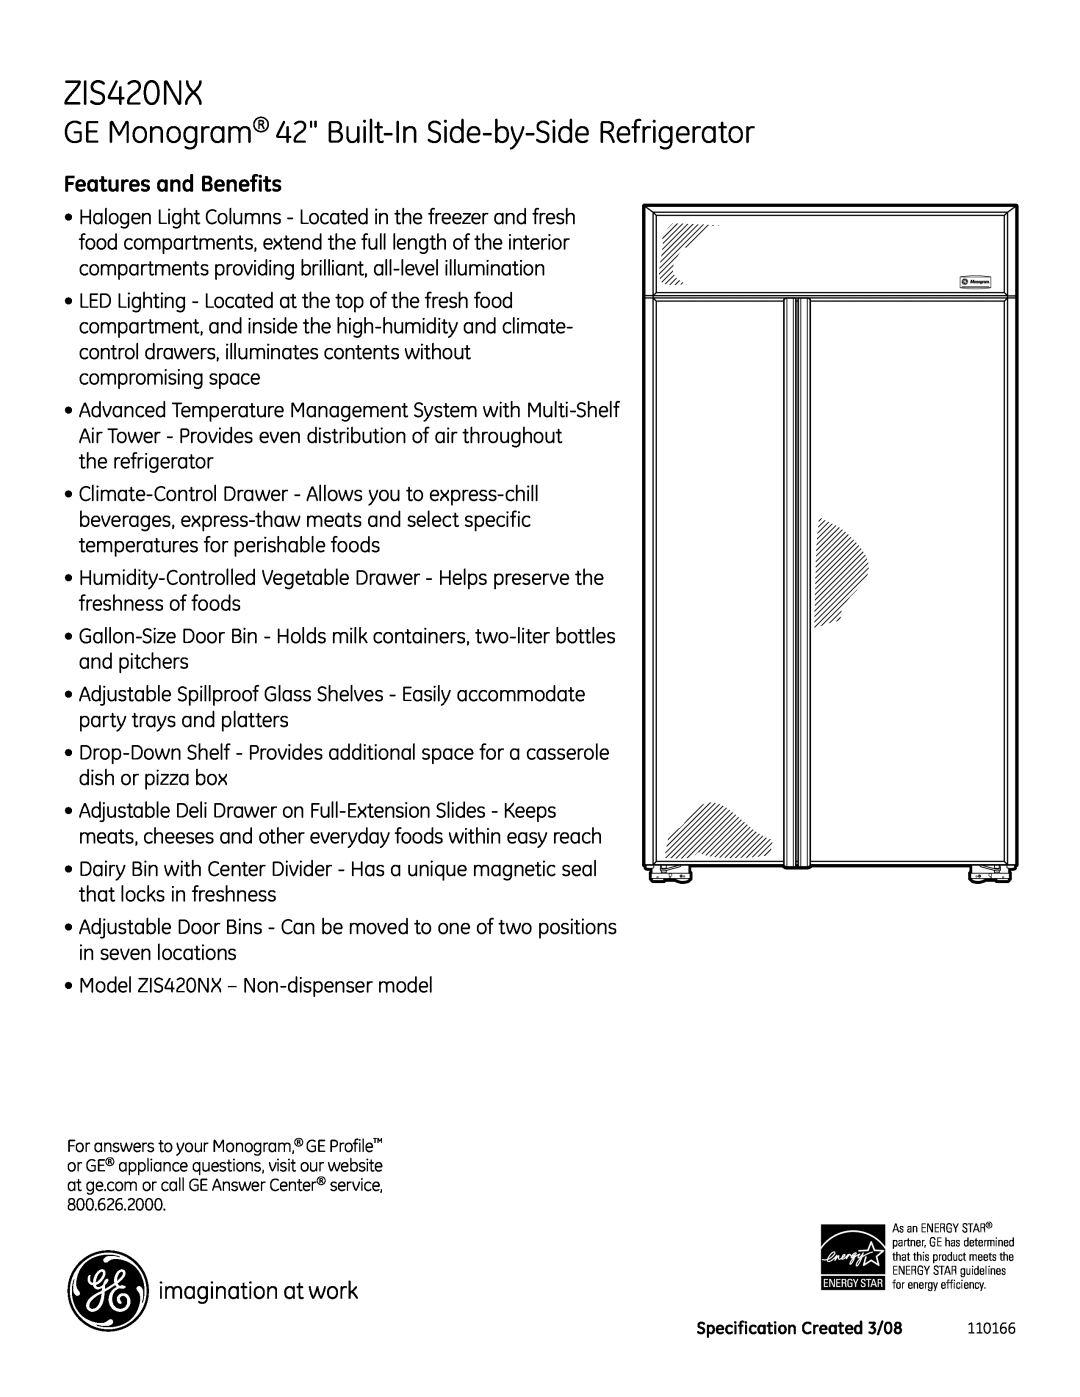 GE Monogram ZIS420NX dimensions Features and Benefits, GE Monogram 42 Built-In Side-by-Side Refrigerator 